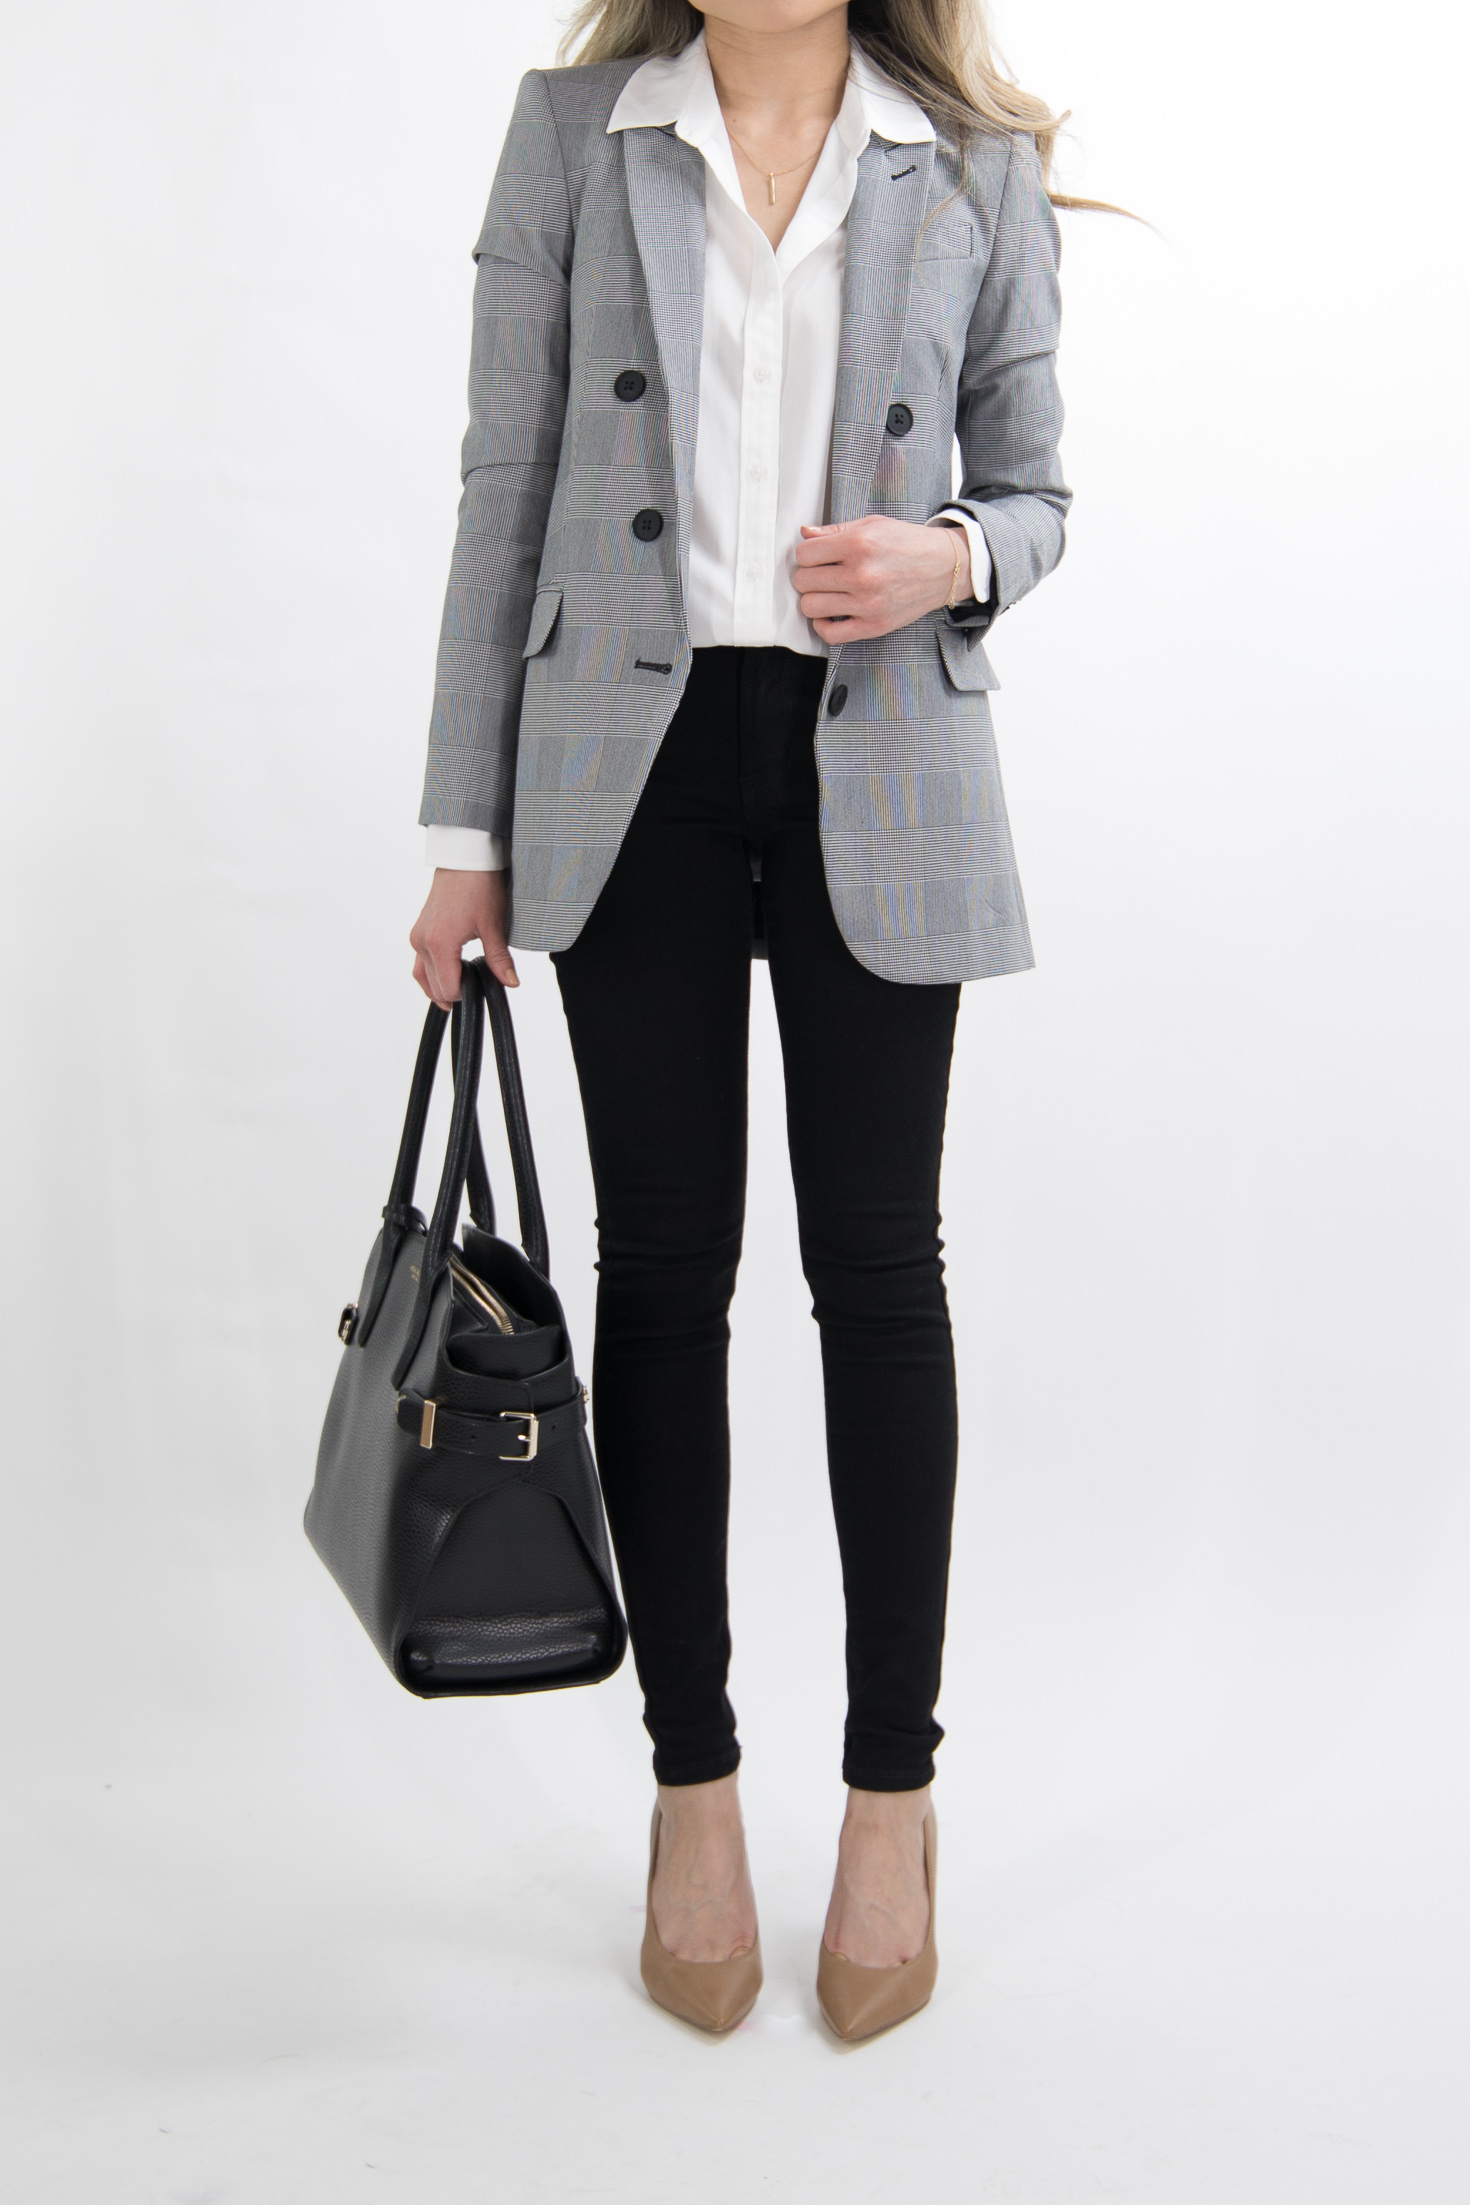 1 MONTH of Business Casual Work Outfit Ideas for Women